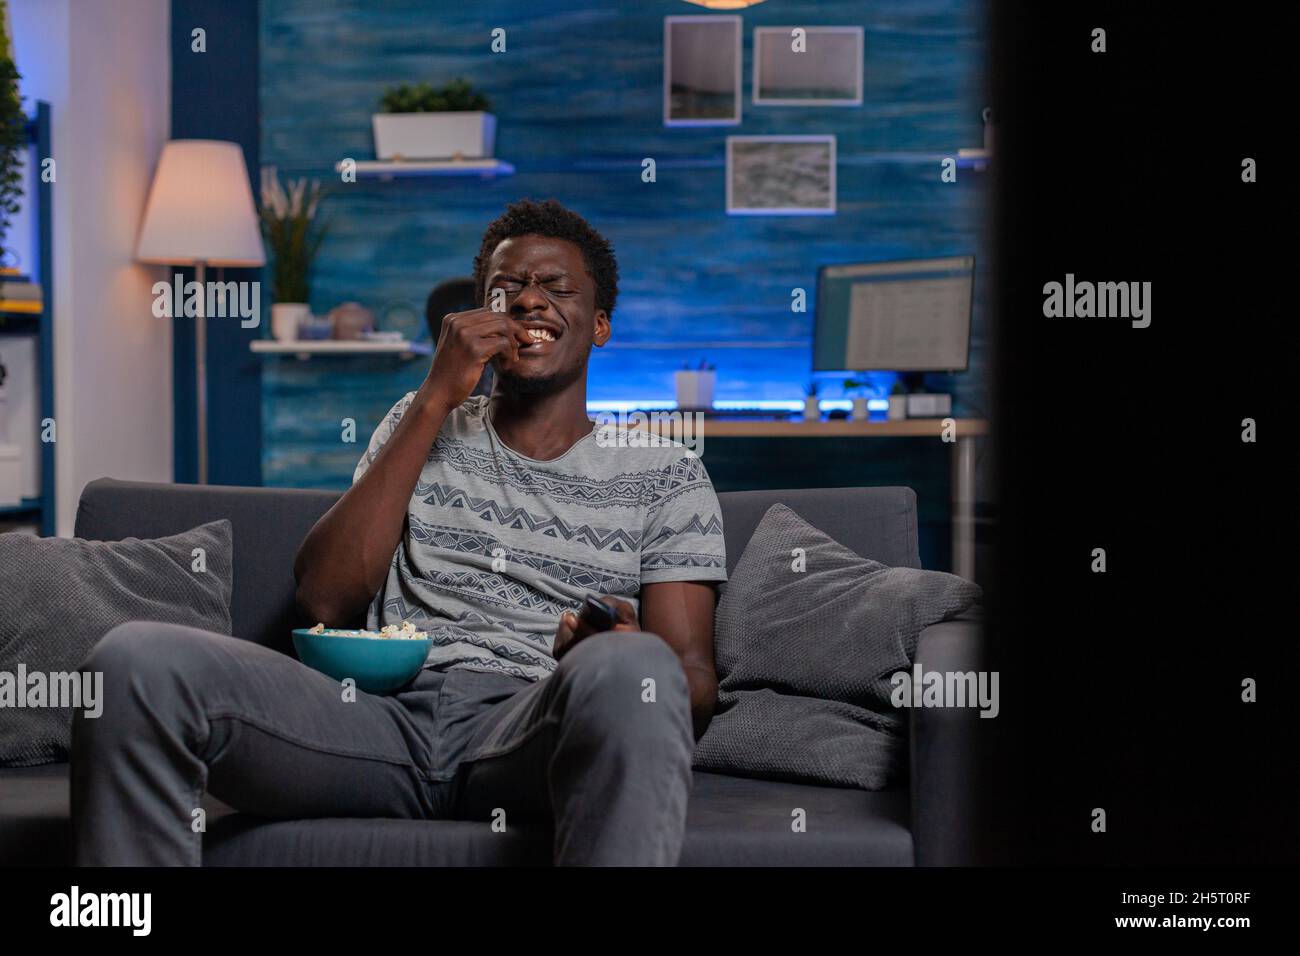 African american young man watching television laughing during comedy movie relaxing in living room. Black guy sitting on sofa while eating popcorn enjoying spending tine alone Stock Photo